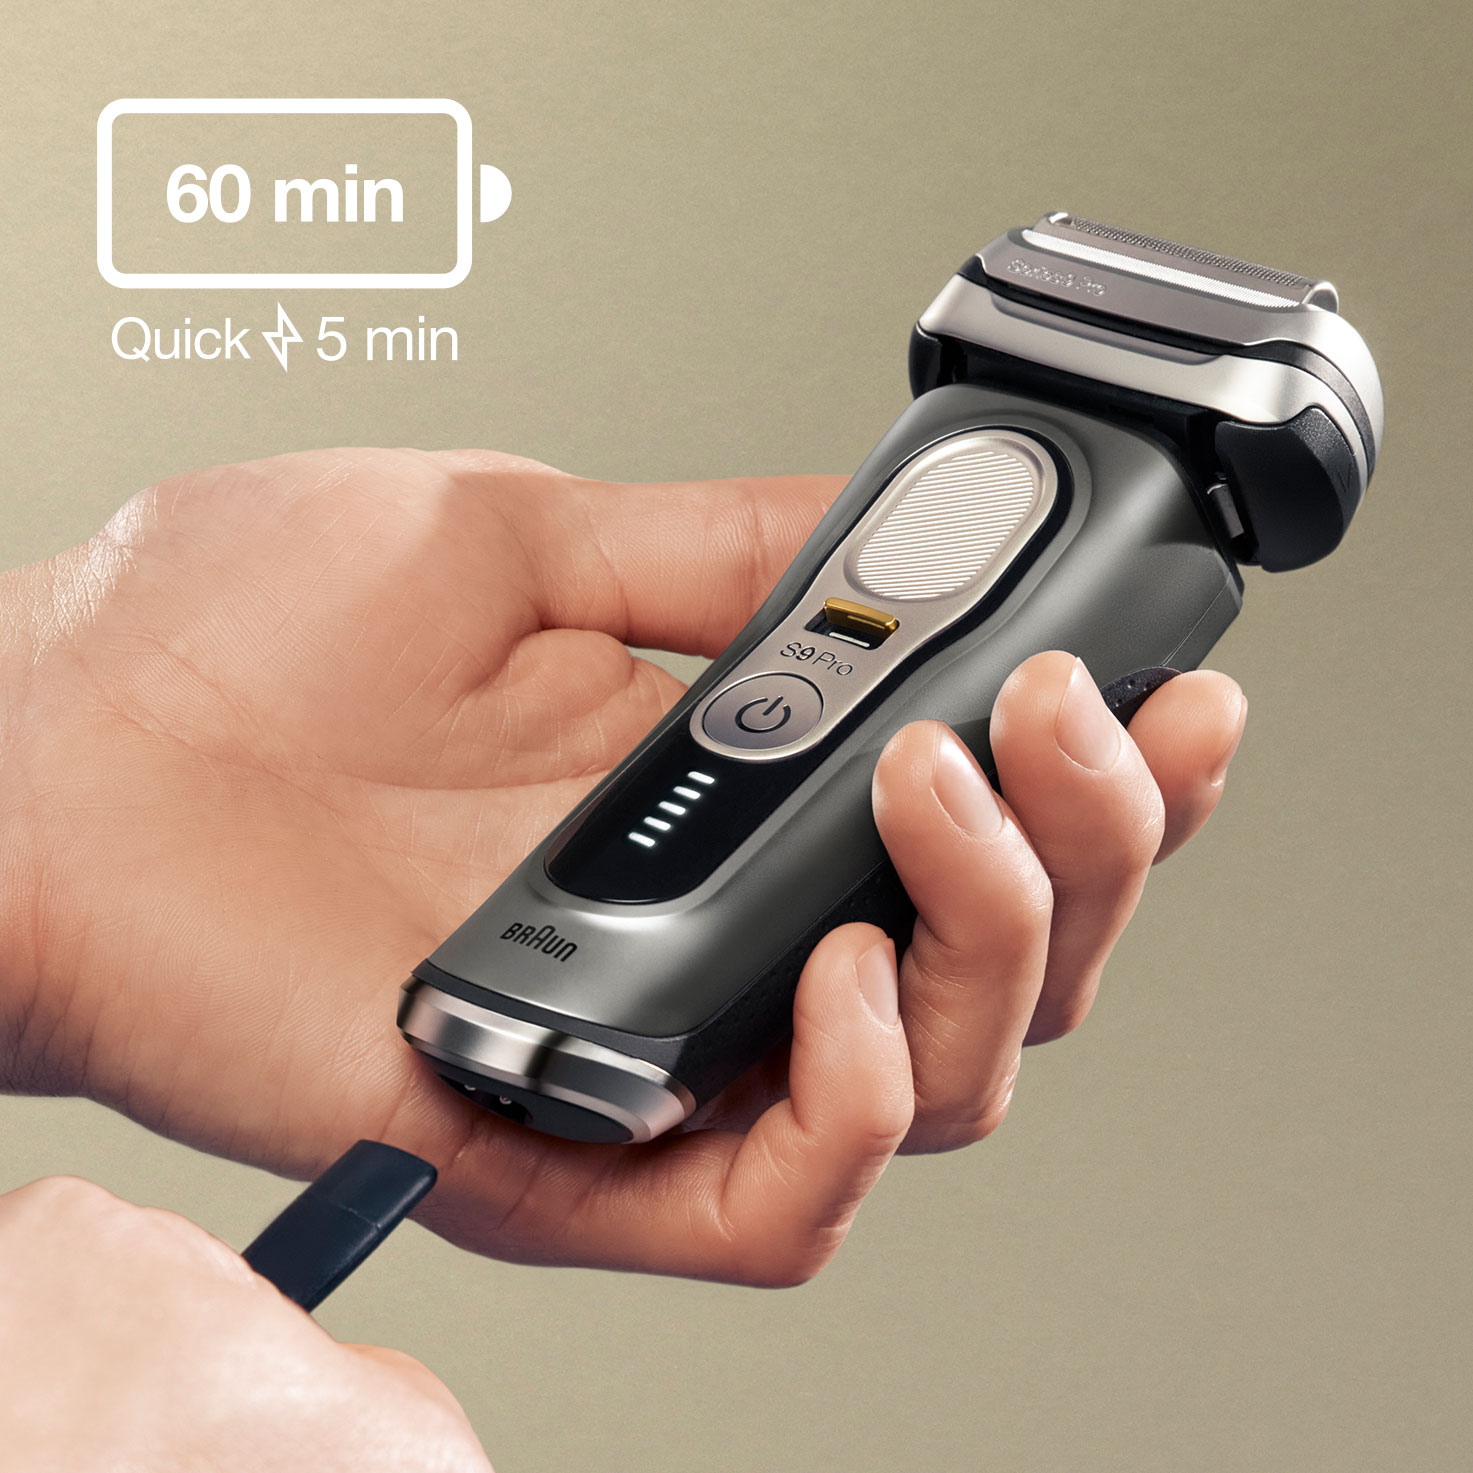 Buy Braun Series 9 Pro Shaver With 5-In-1 SmartCare Center 9465CC Grey  Online - Shop Beauty & Personal Care on Carrefour UAE